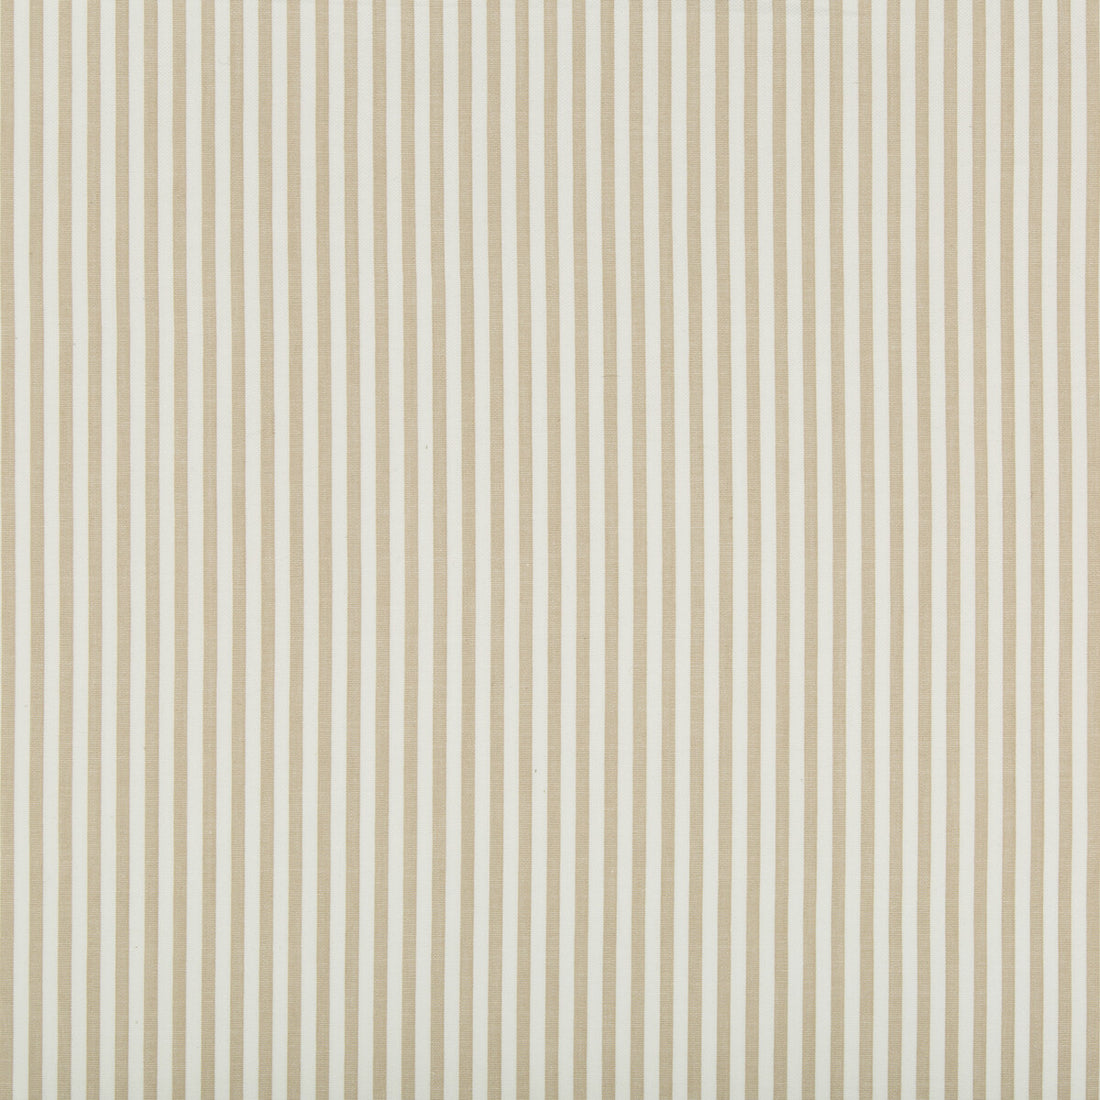 Cap Ferrat Stripe fabric in beige color - pattern 2018146.116.0 - by Lee Jofa in the Suzanne Kasler The Riviera collection